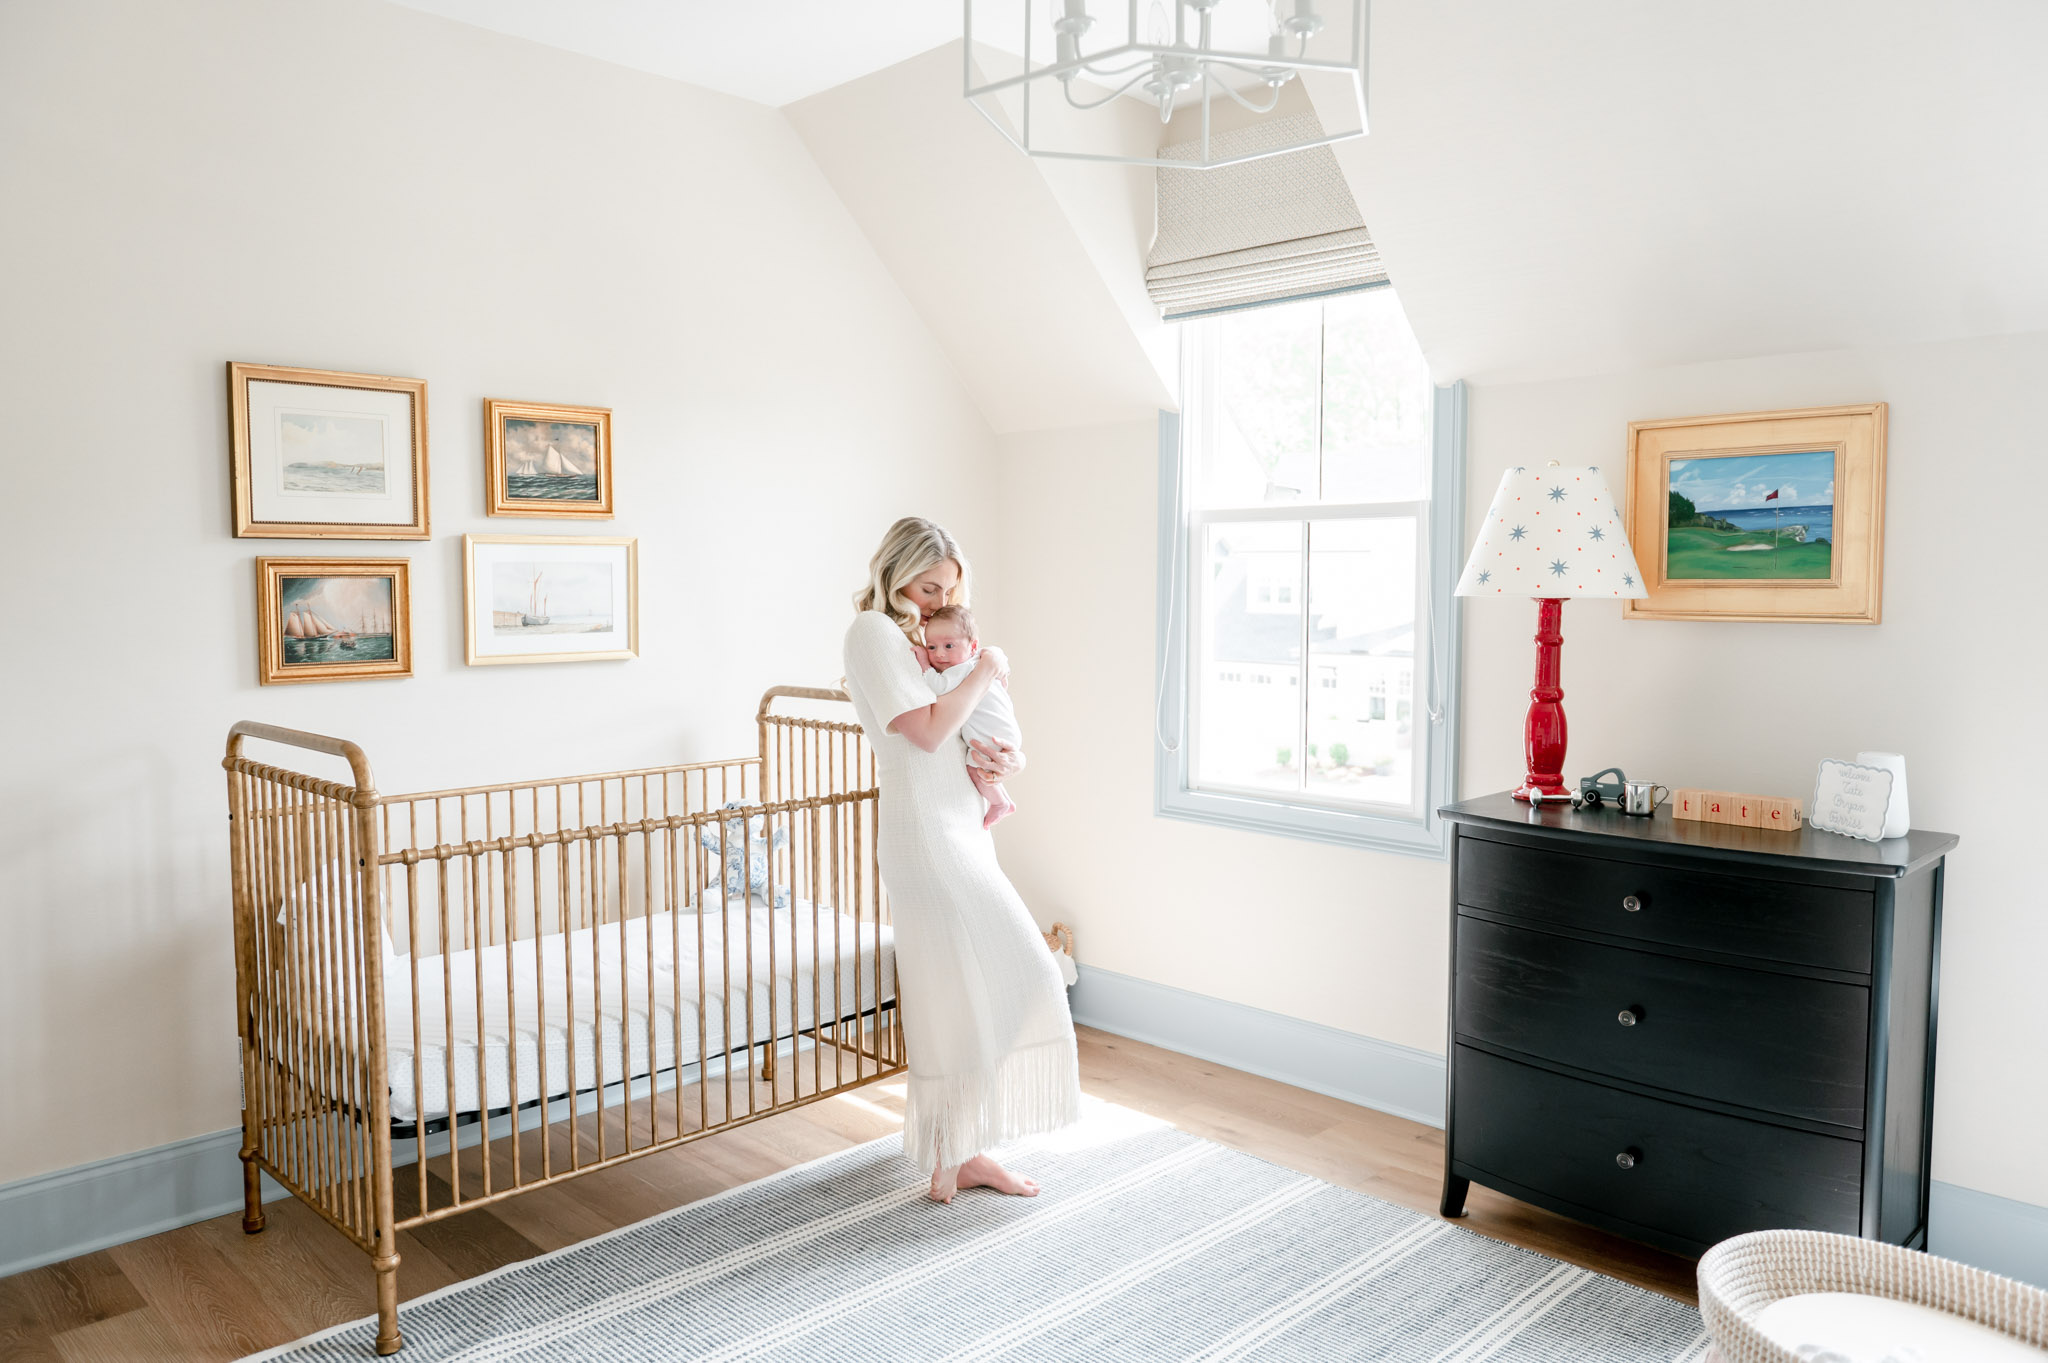 Nursery inspiration : a mom holds her baby as she leans on a gold crib